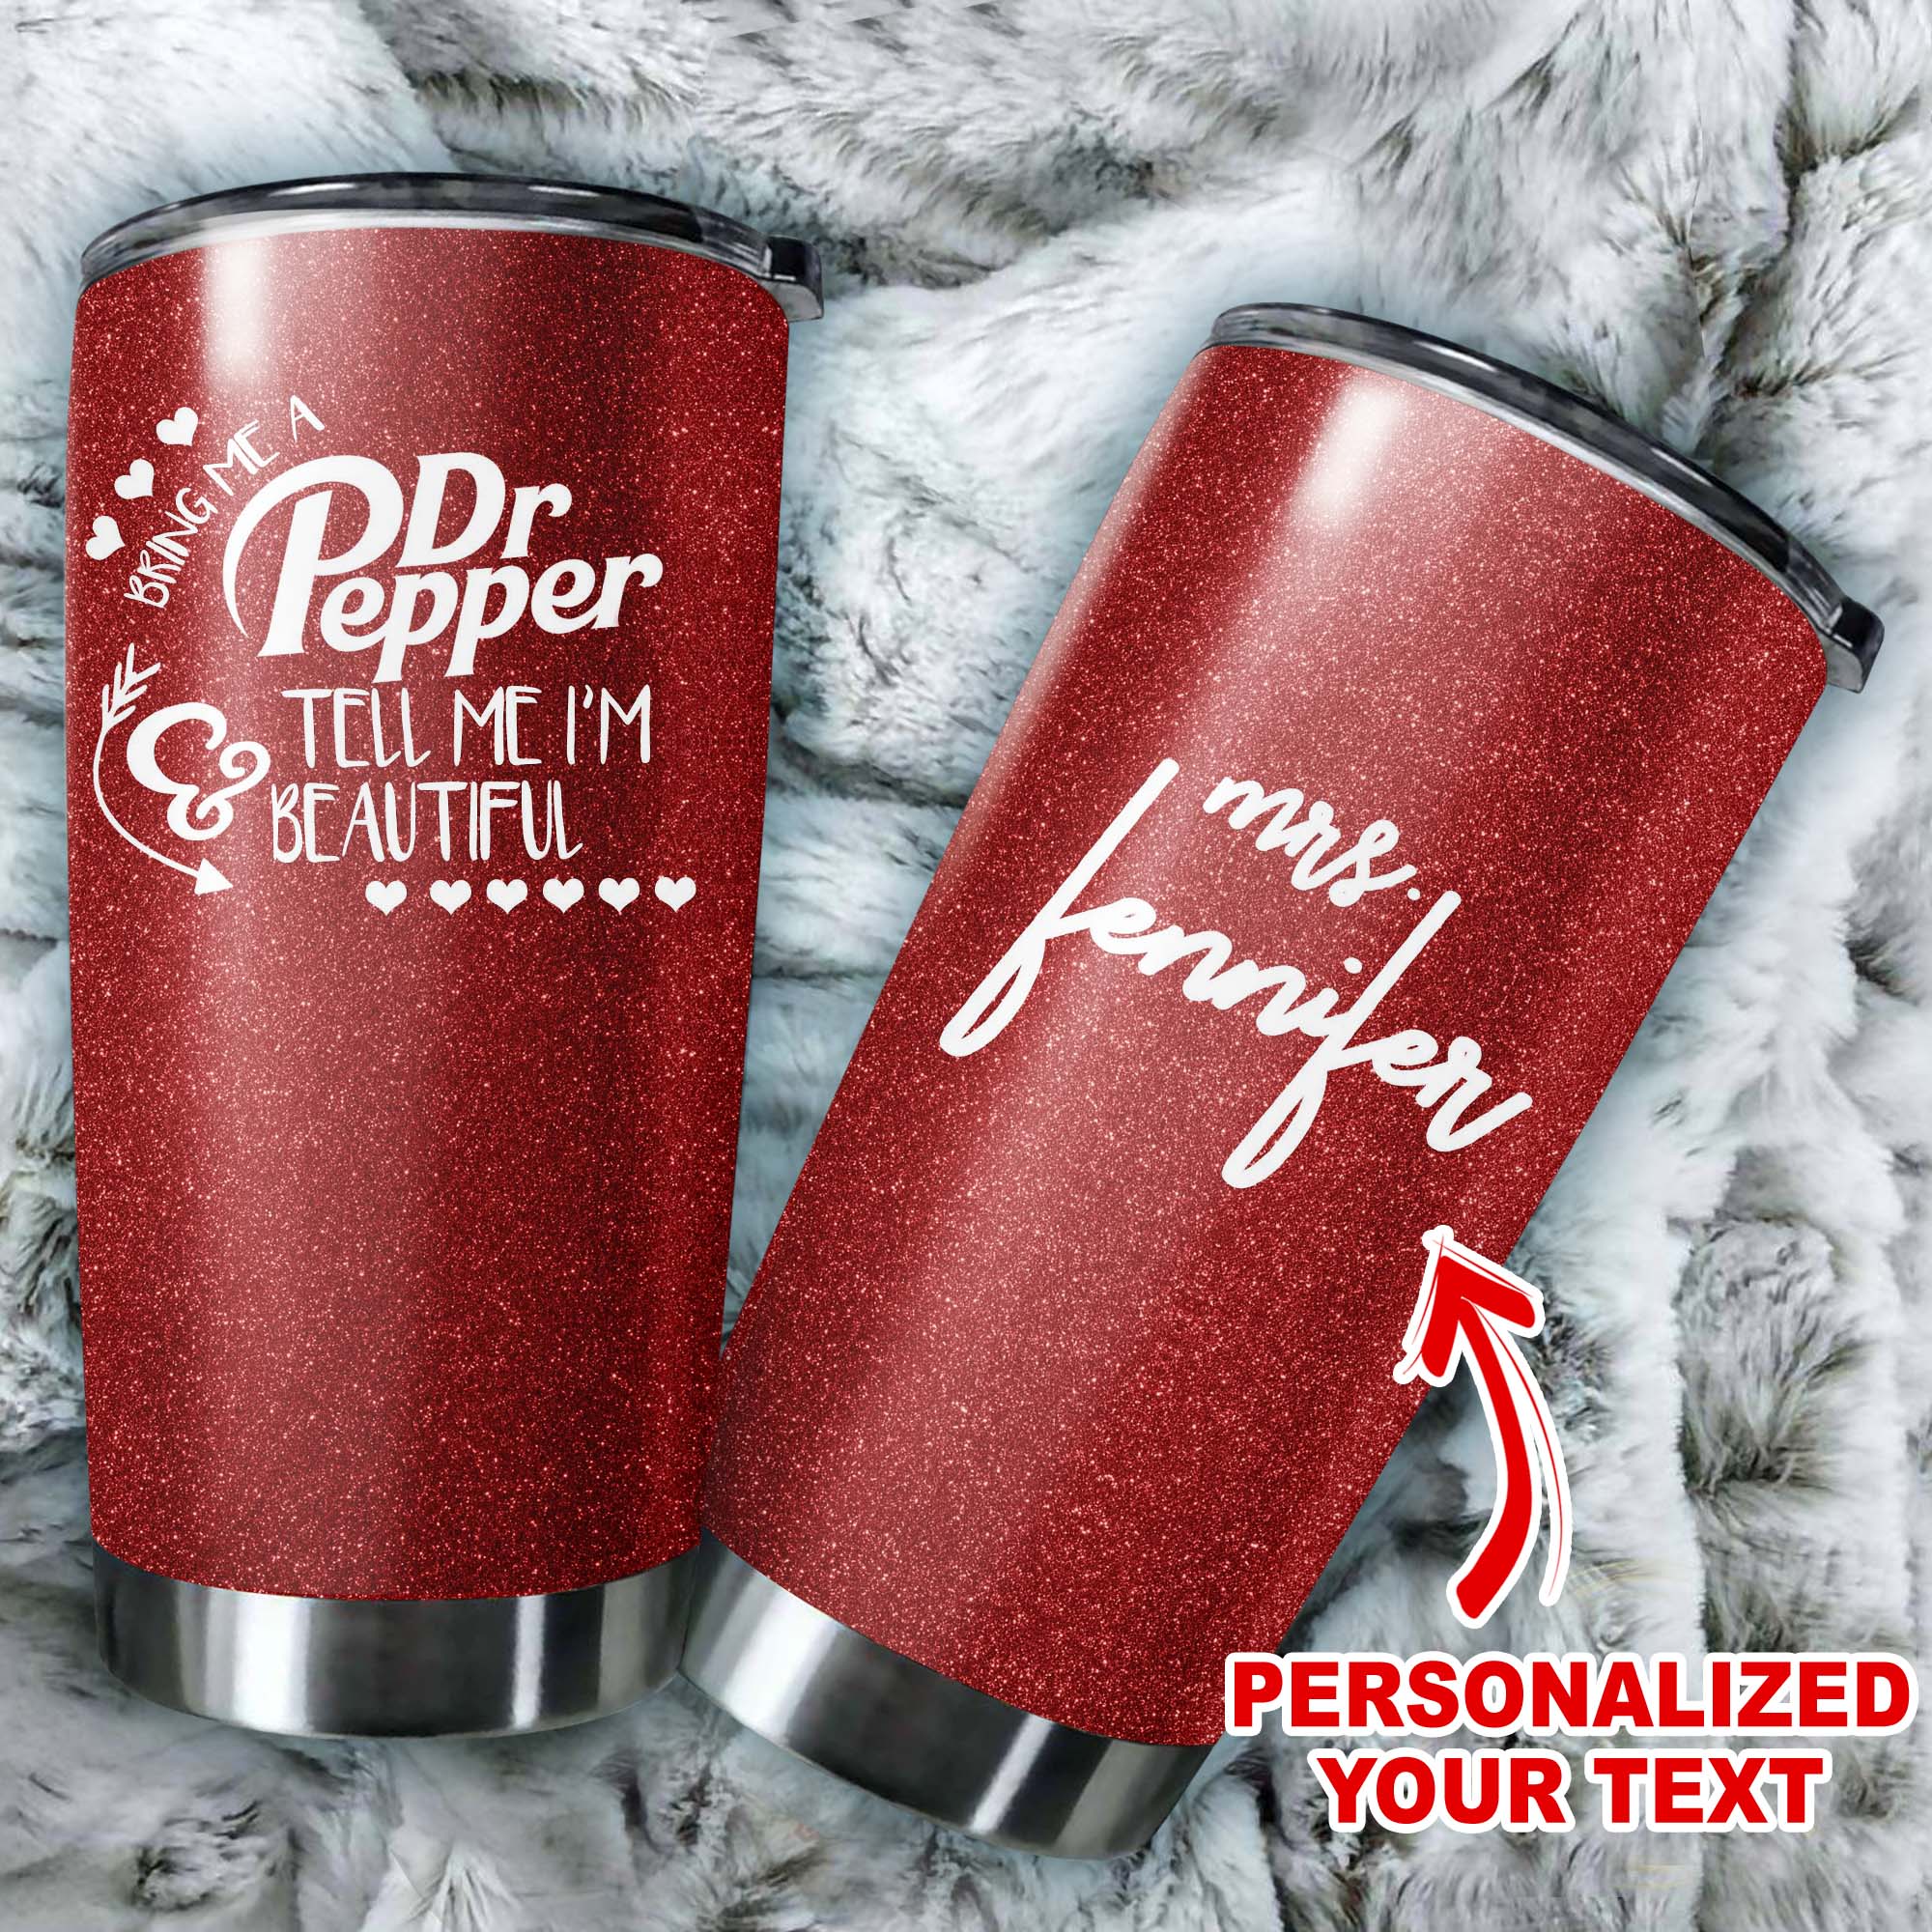 https://swagteeshirt.com/wp-content/uploads/2020/04/Personalized-dr-pepper-tell-me-im-beautiful-all-over-printed-tumbler-3.jpg